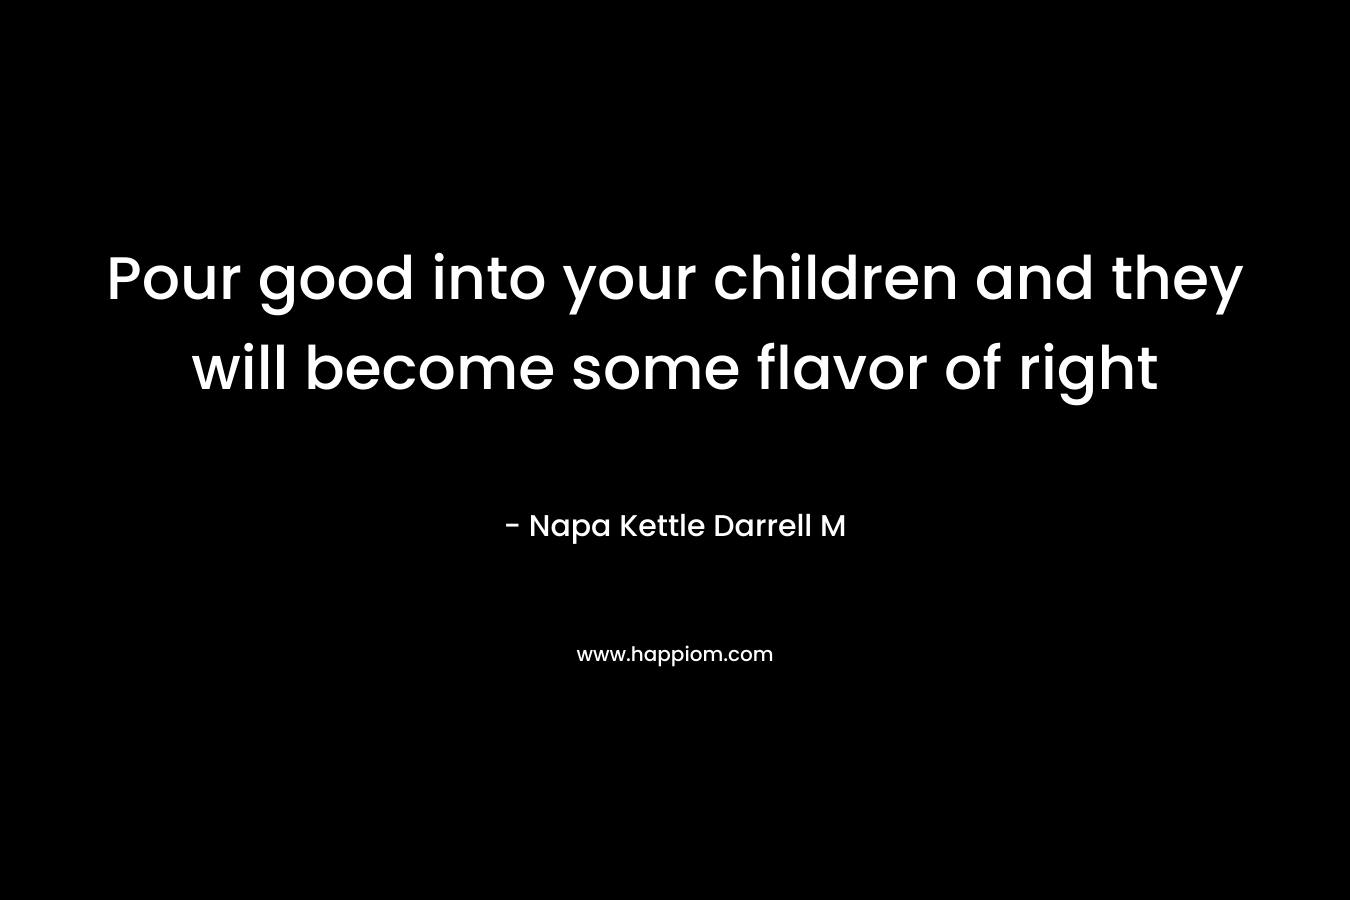 Pour good into your children and they will become some flavor of right